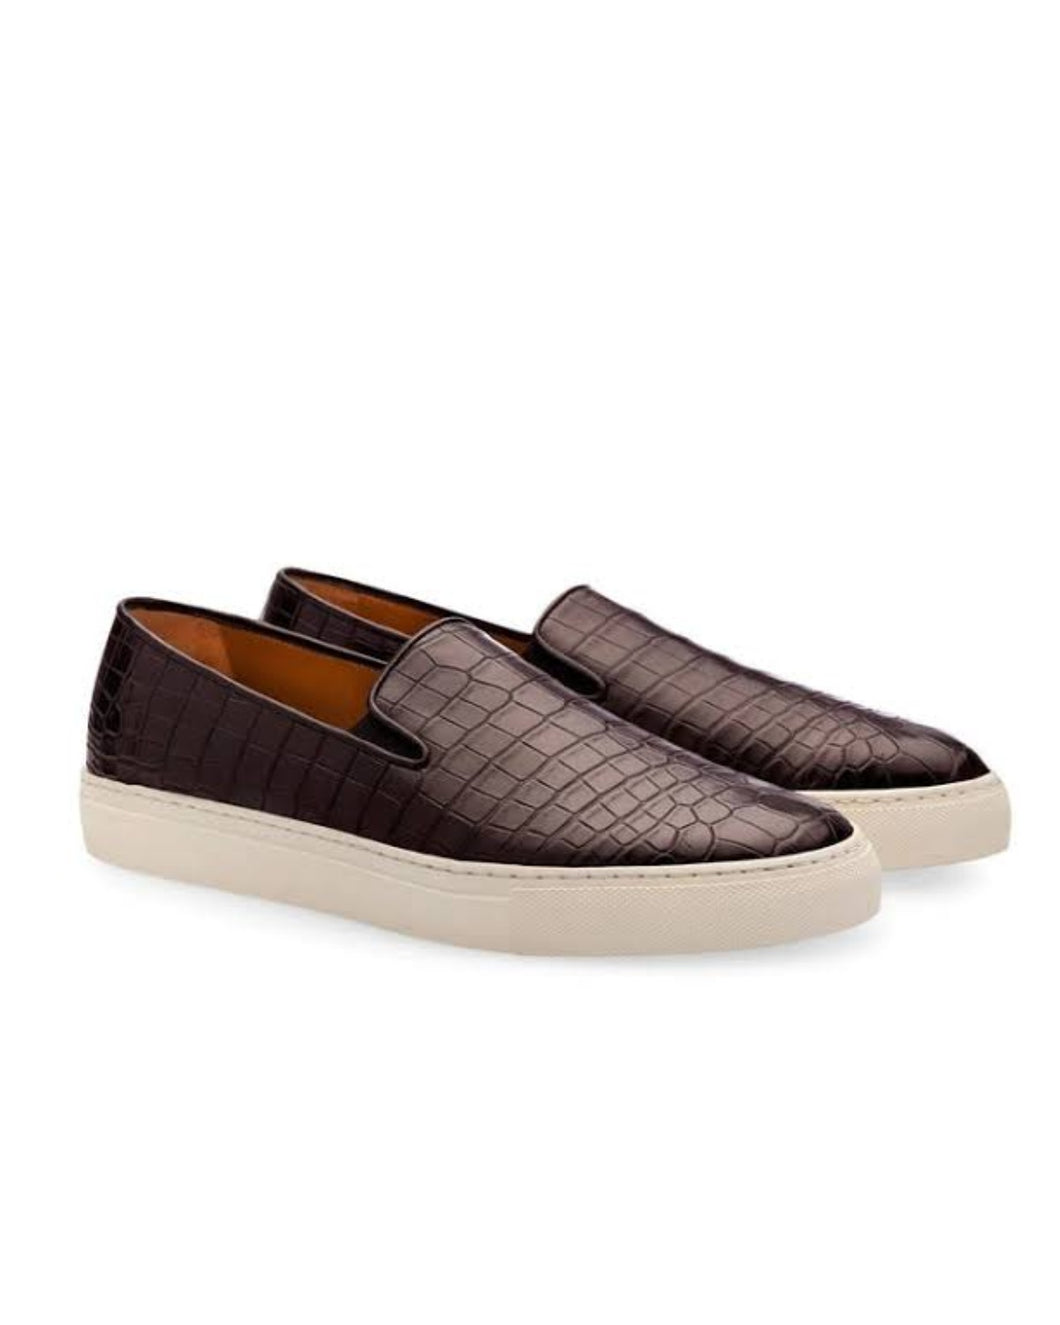 BROWN GOVERNORS ALLIGATOR SLIP ON SNEAKERS